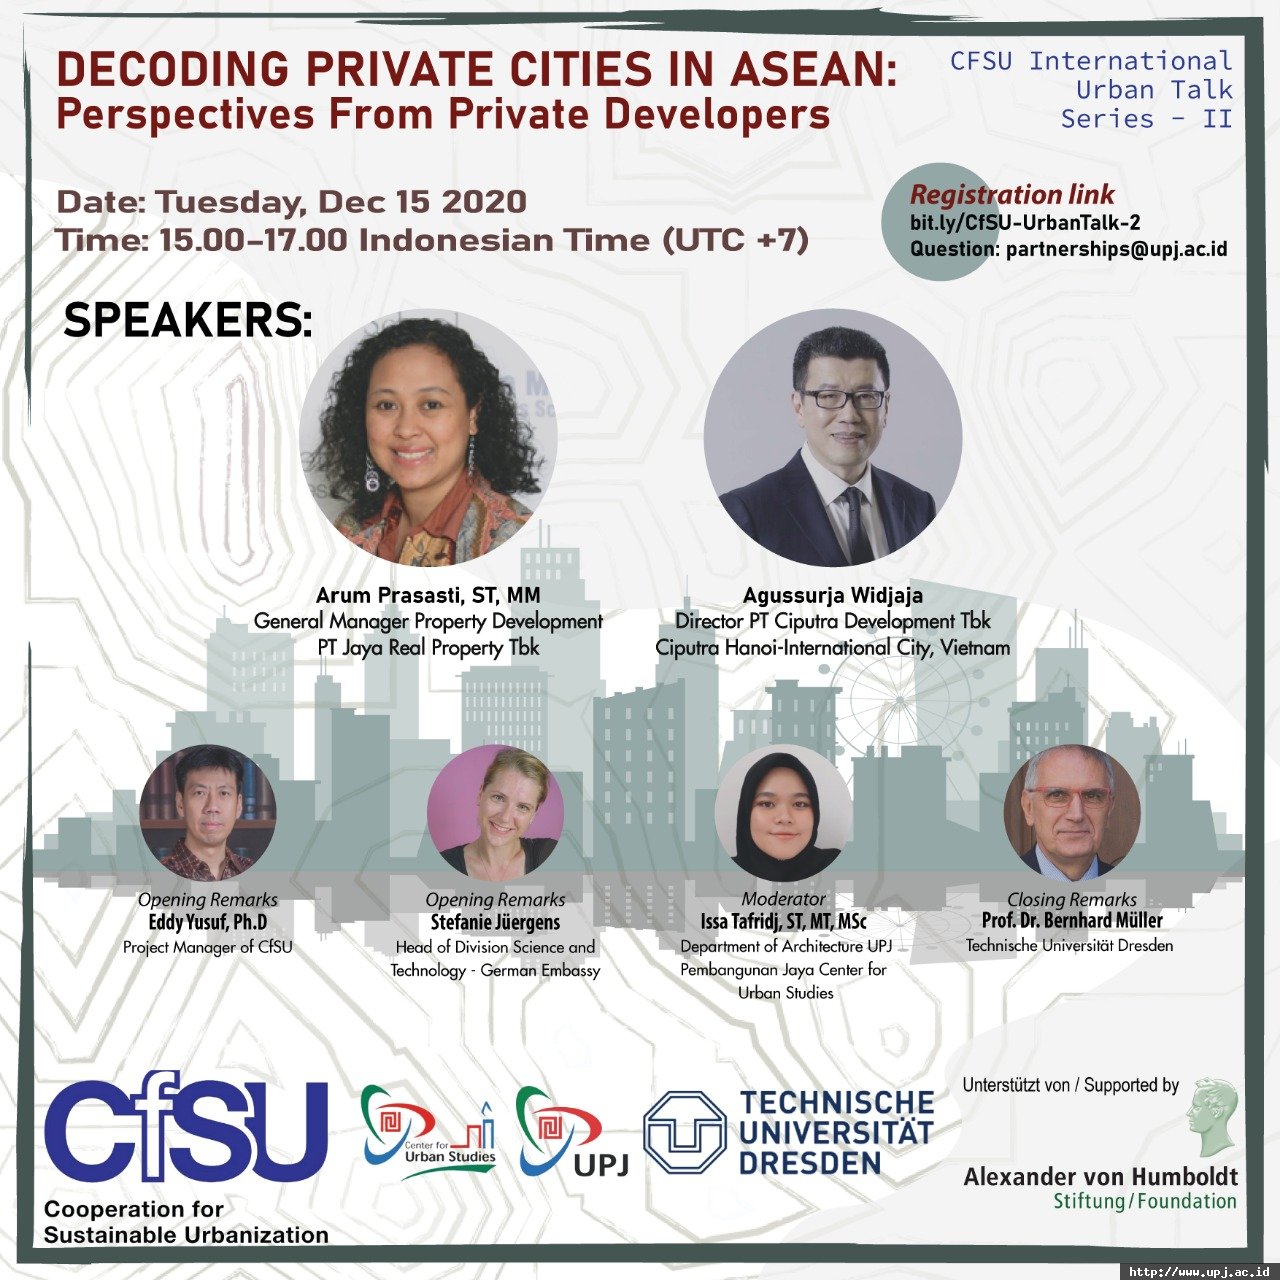 CFSU International Urban Talk Series II - DECODING PRIVATE CITIES IN ASEAN: Perspective From Private Developers